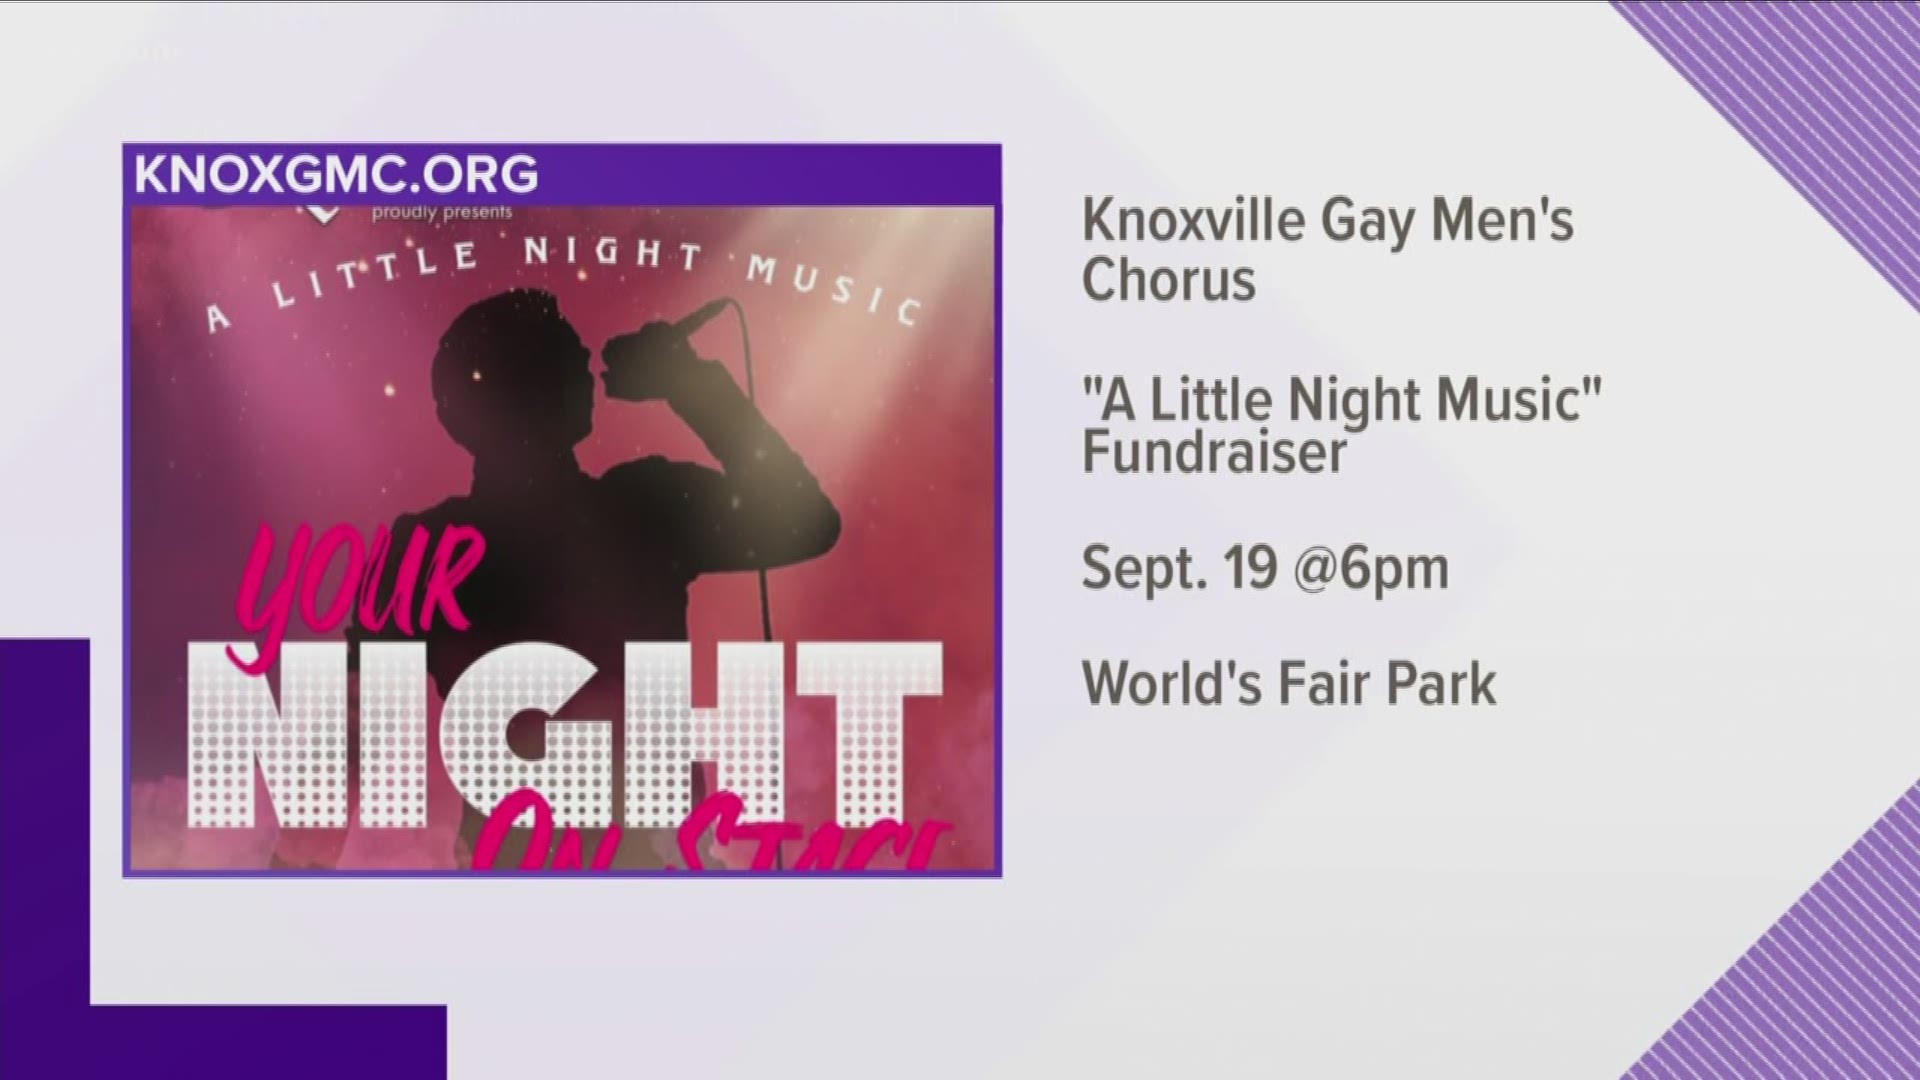 "A Little Night Music" is September 19 at World's Fair Park. knoxgmc.org for information and tickets